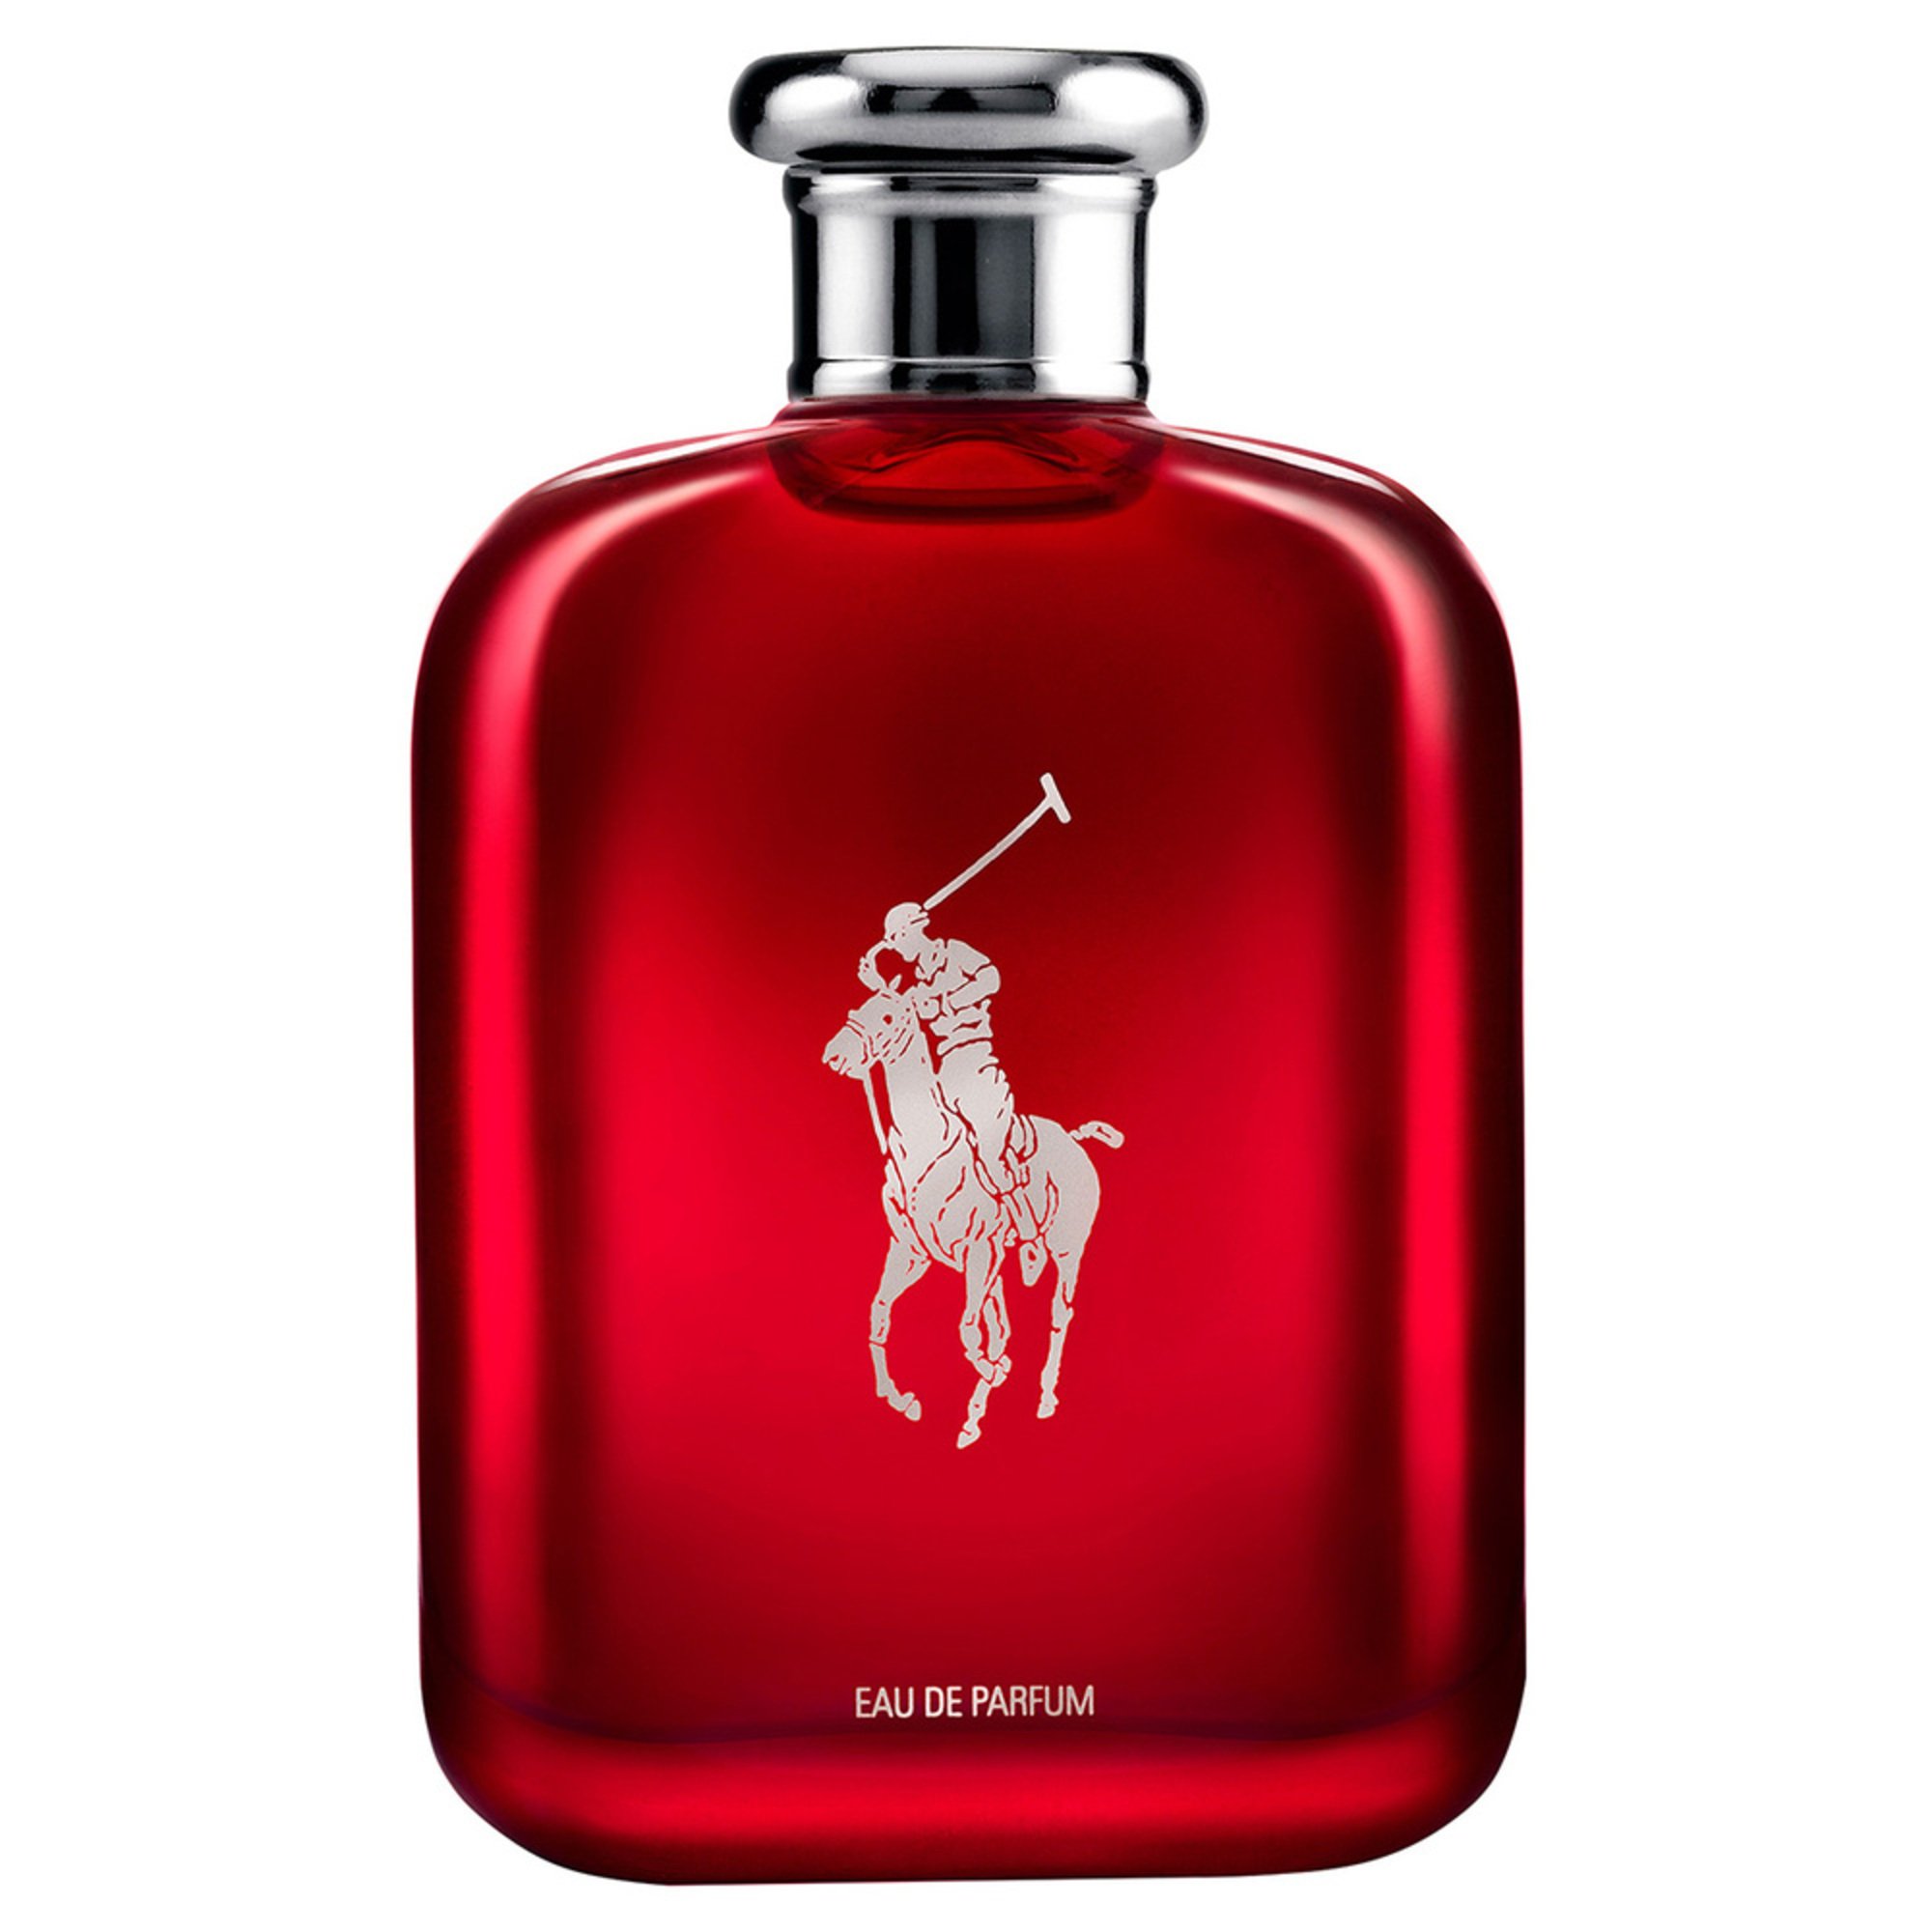 polo number 2 cologne